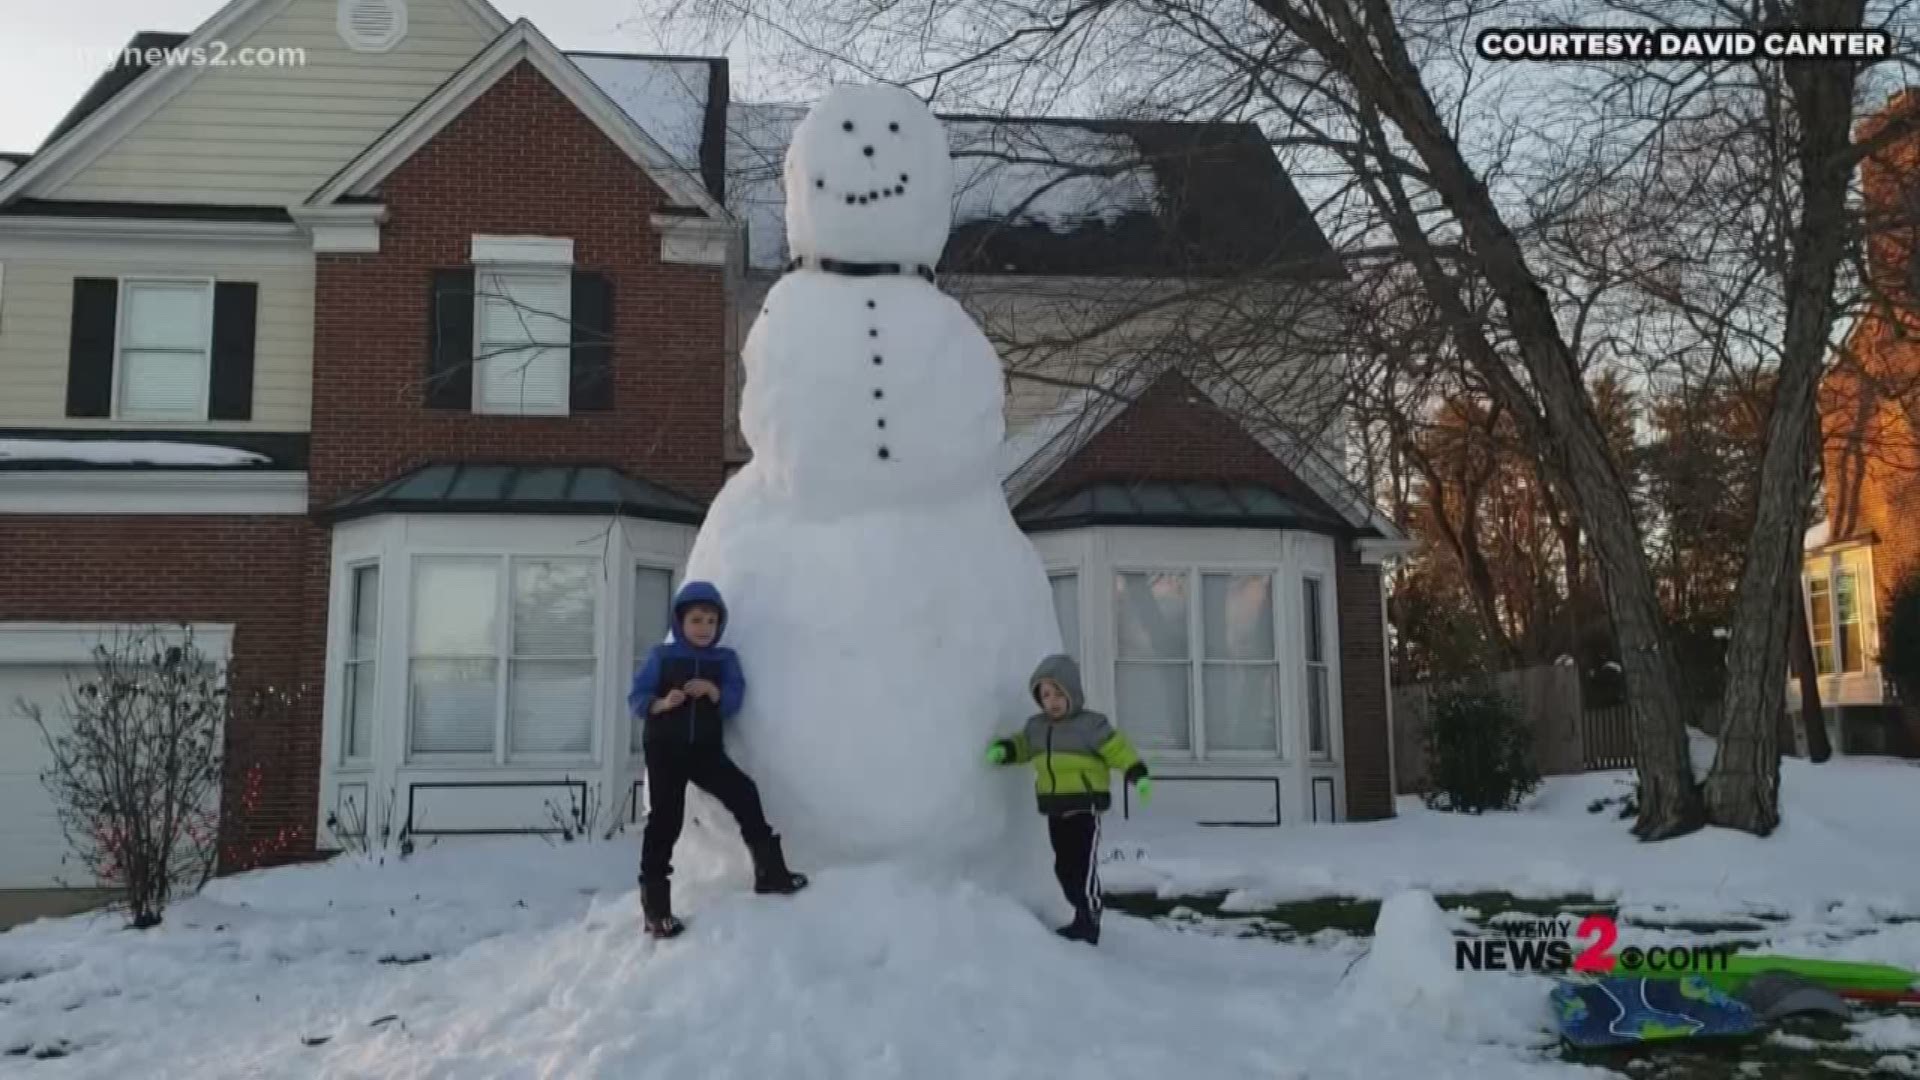 Check out this 12-foot snowman!